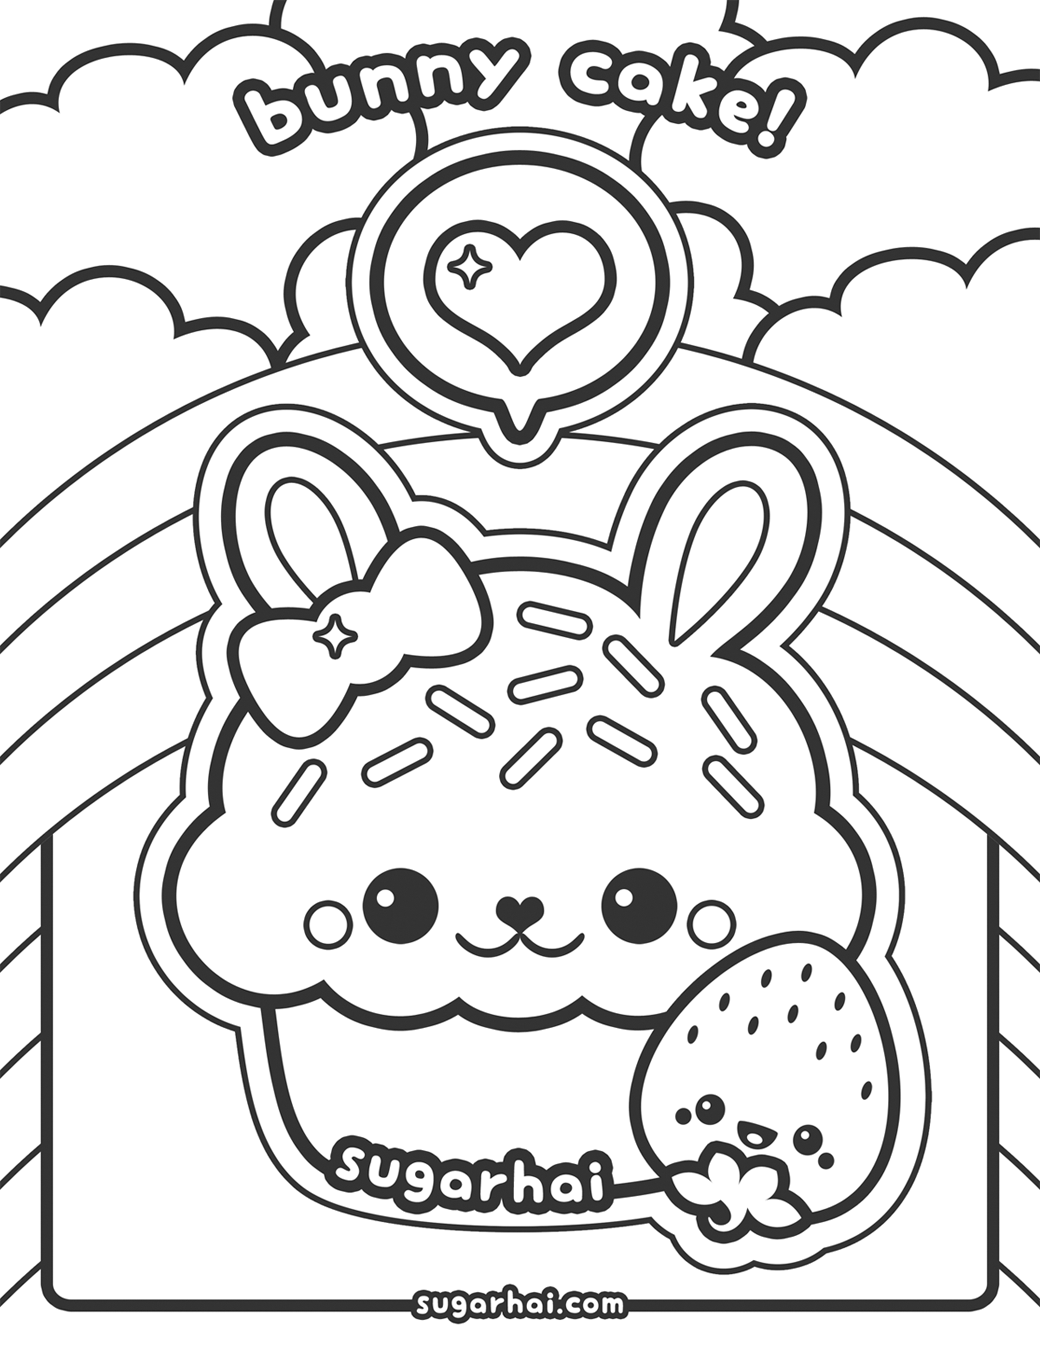 Unicorn Cakes Unicorn Cake Coloring Pages   Coloring Home